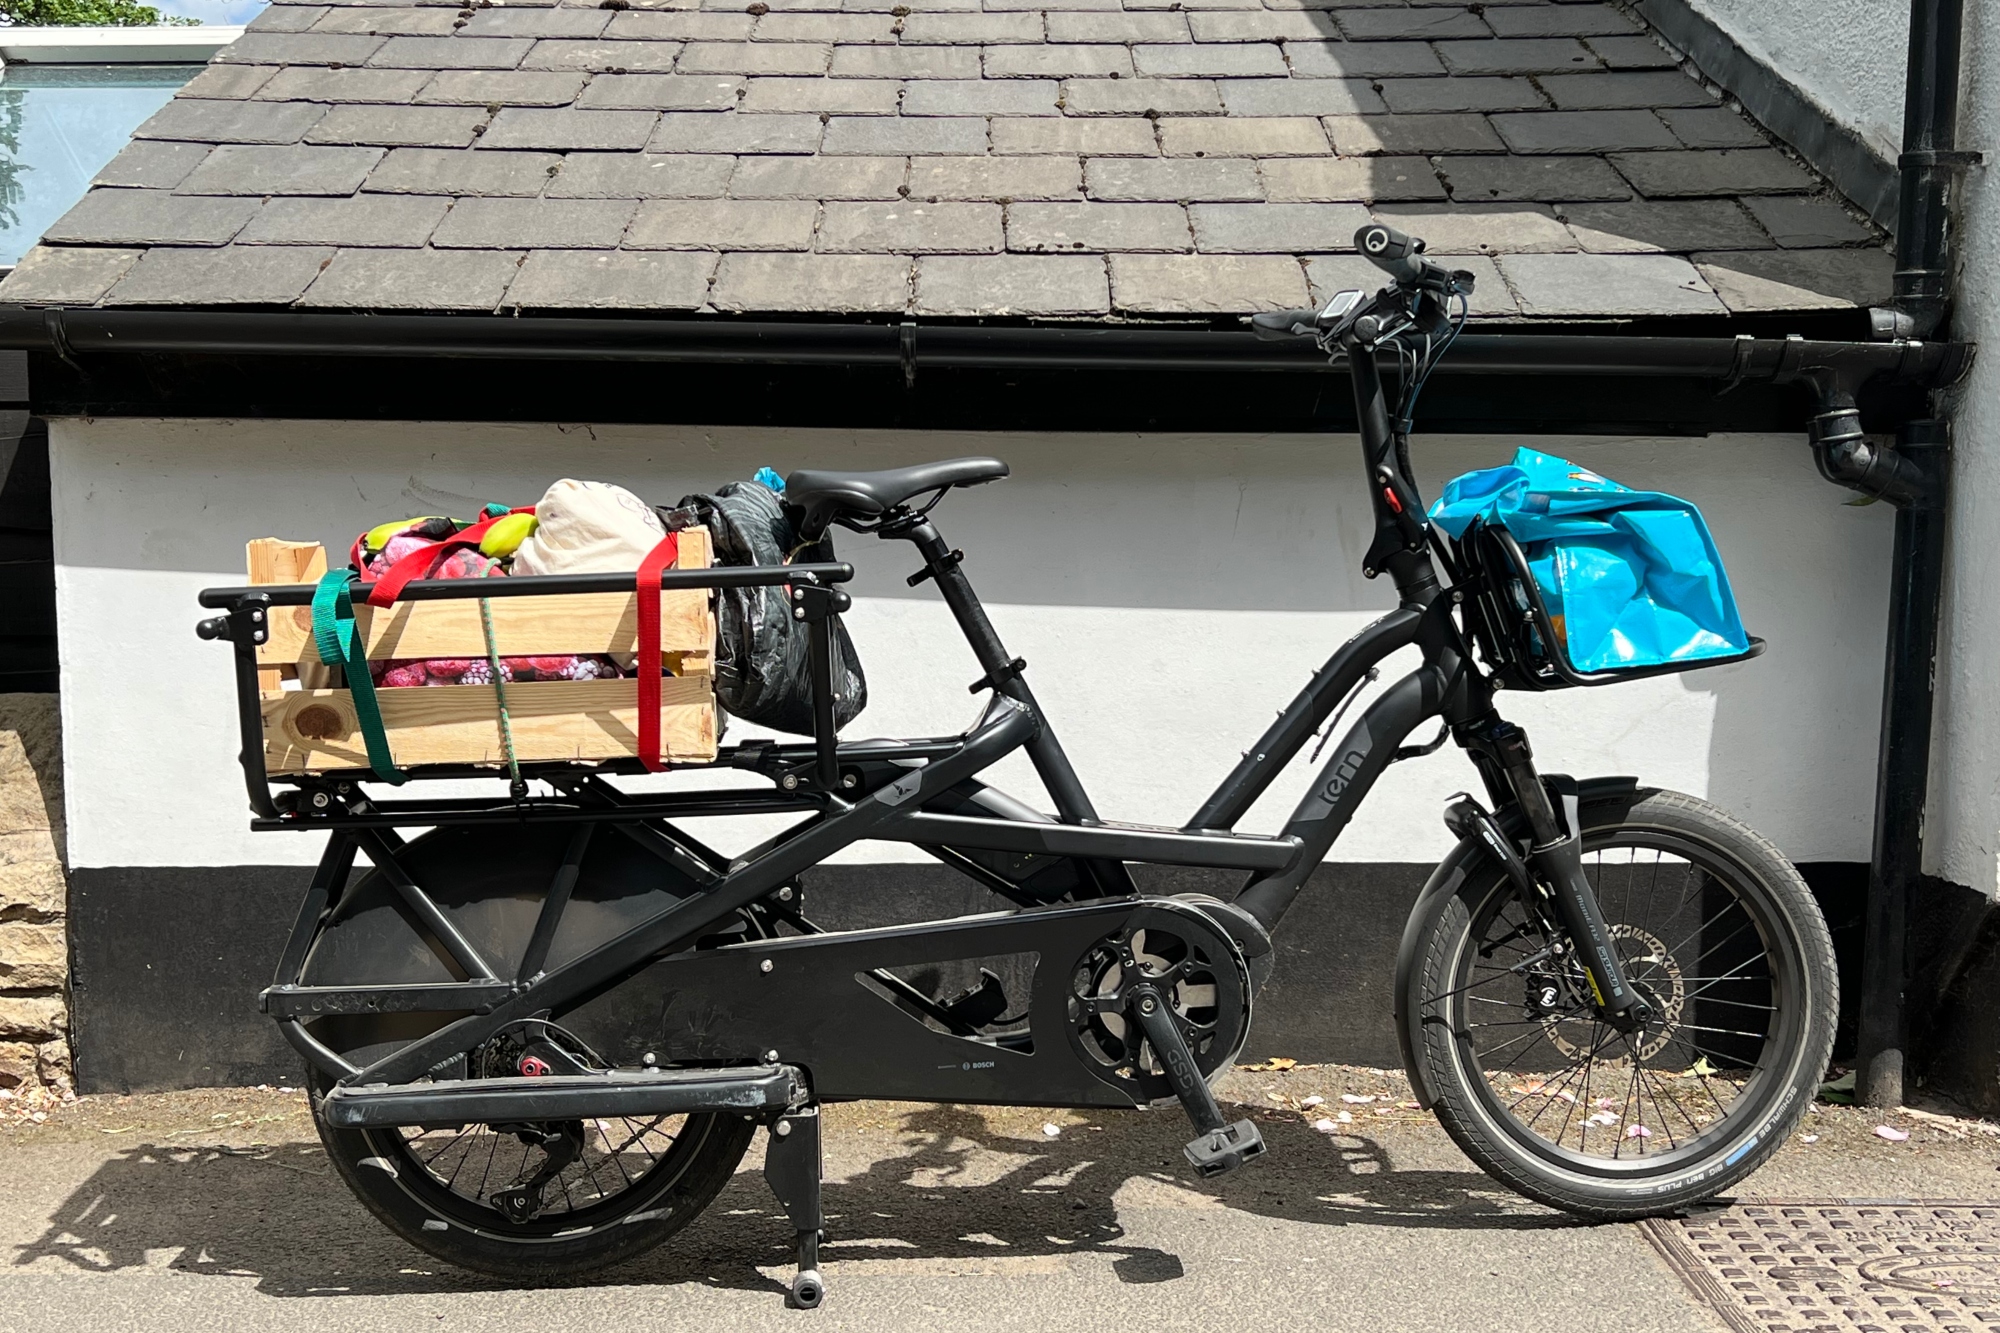 The Tern GSD S10 cargo bike fully pointing to the right with a full cargo load. There is a blue bag on the front and a wooden crate on the back full of shopping. The bike is in front of a black and white building which has a very low tiled roof